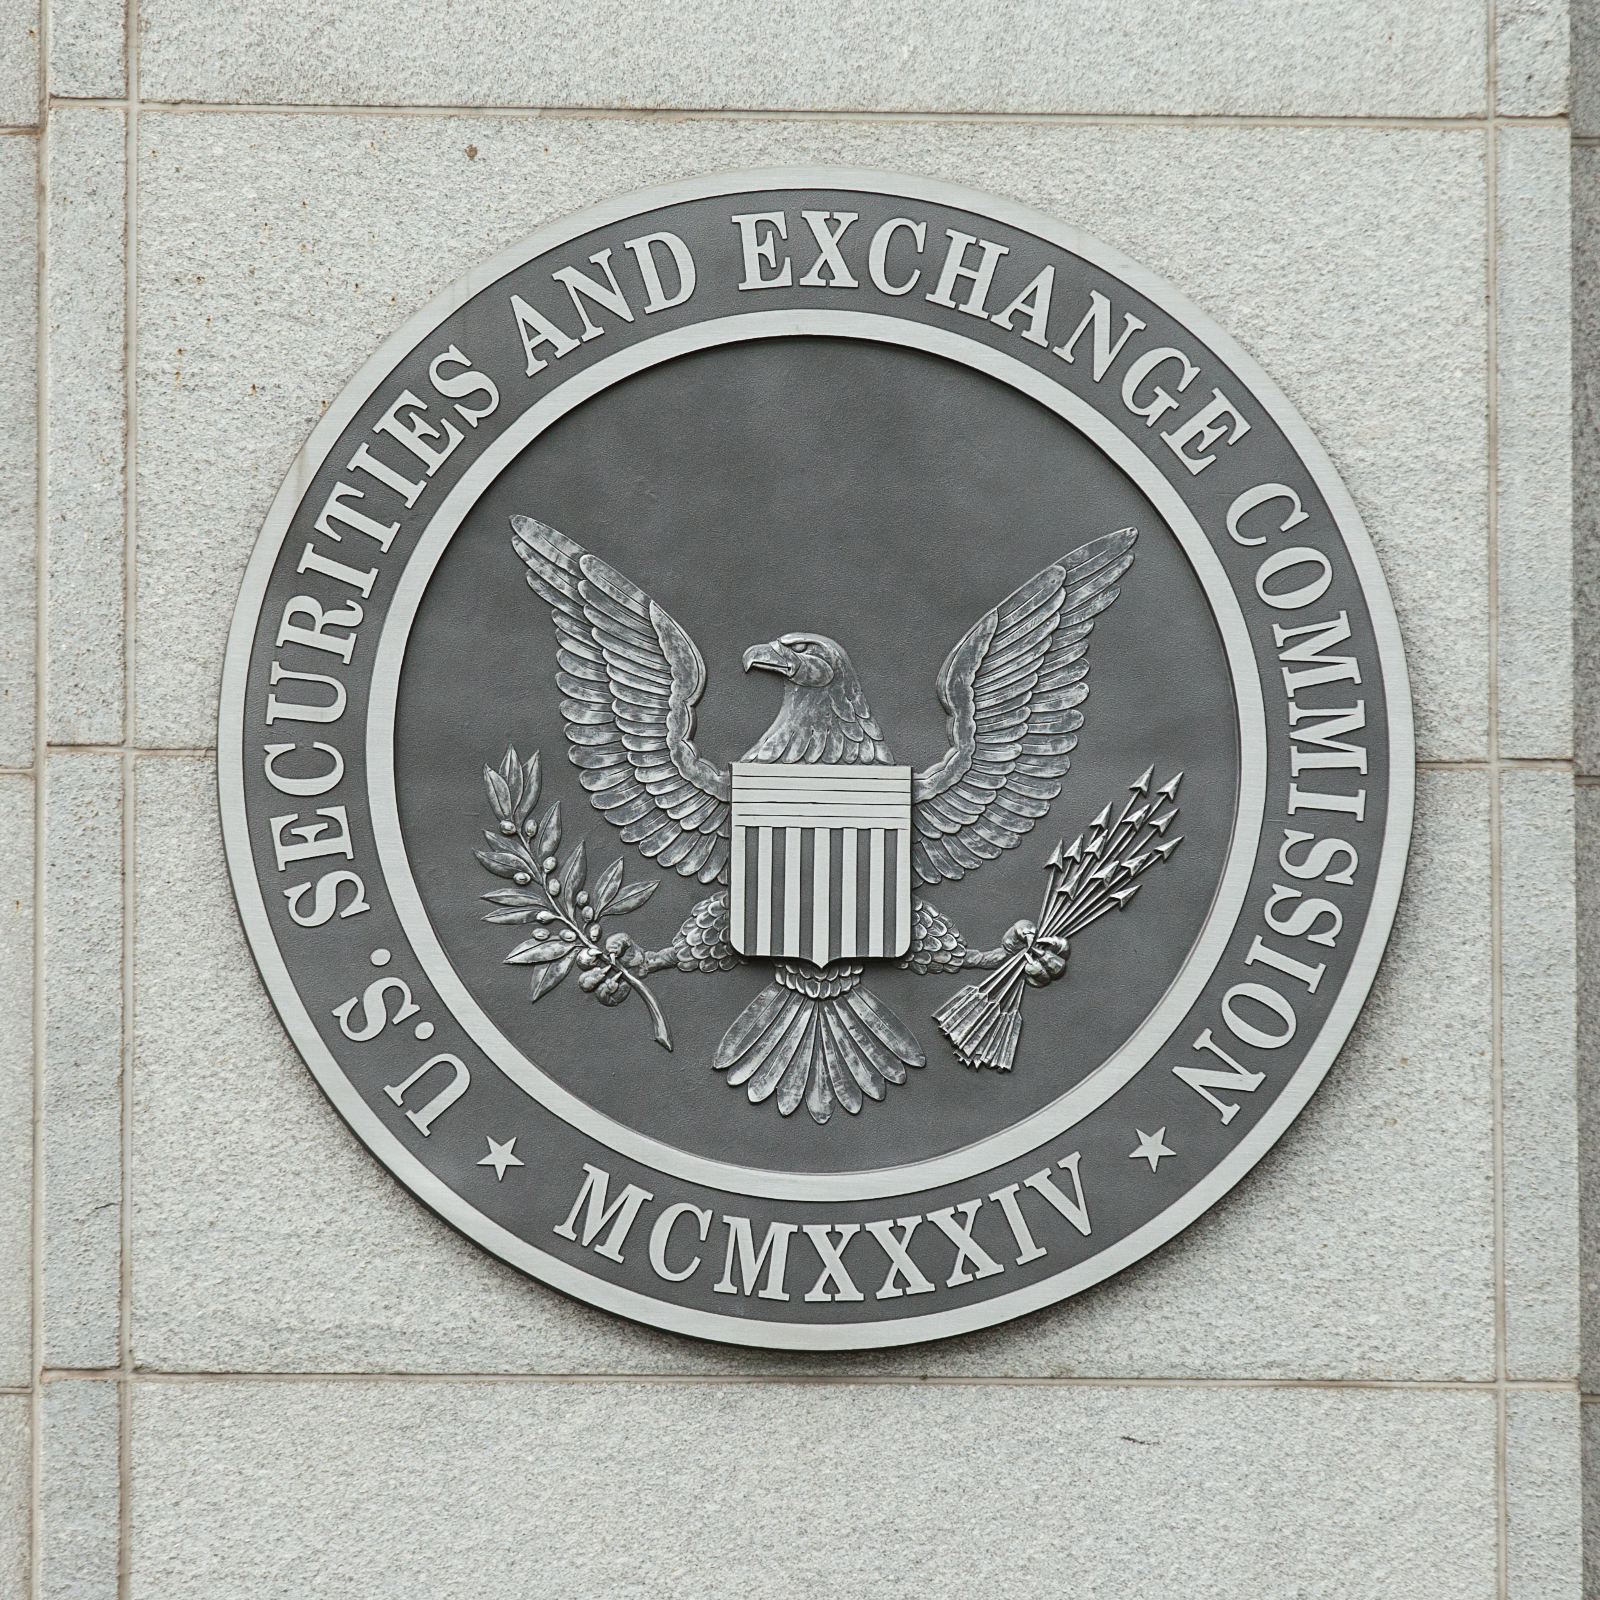 SEC Fails to Show Court Blockvest Tokens Are Securities